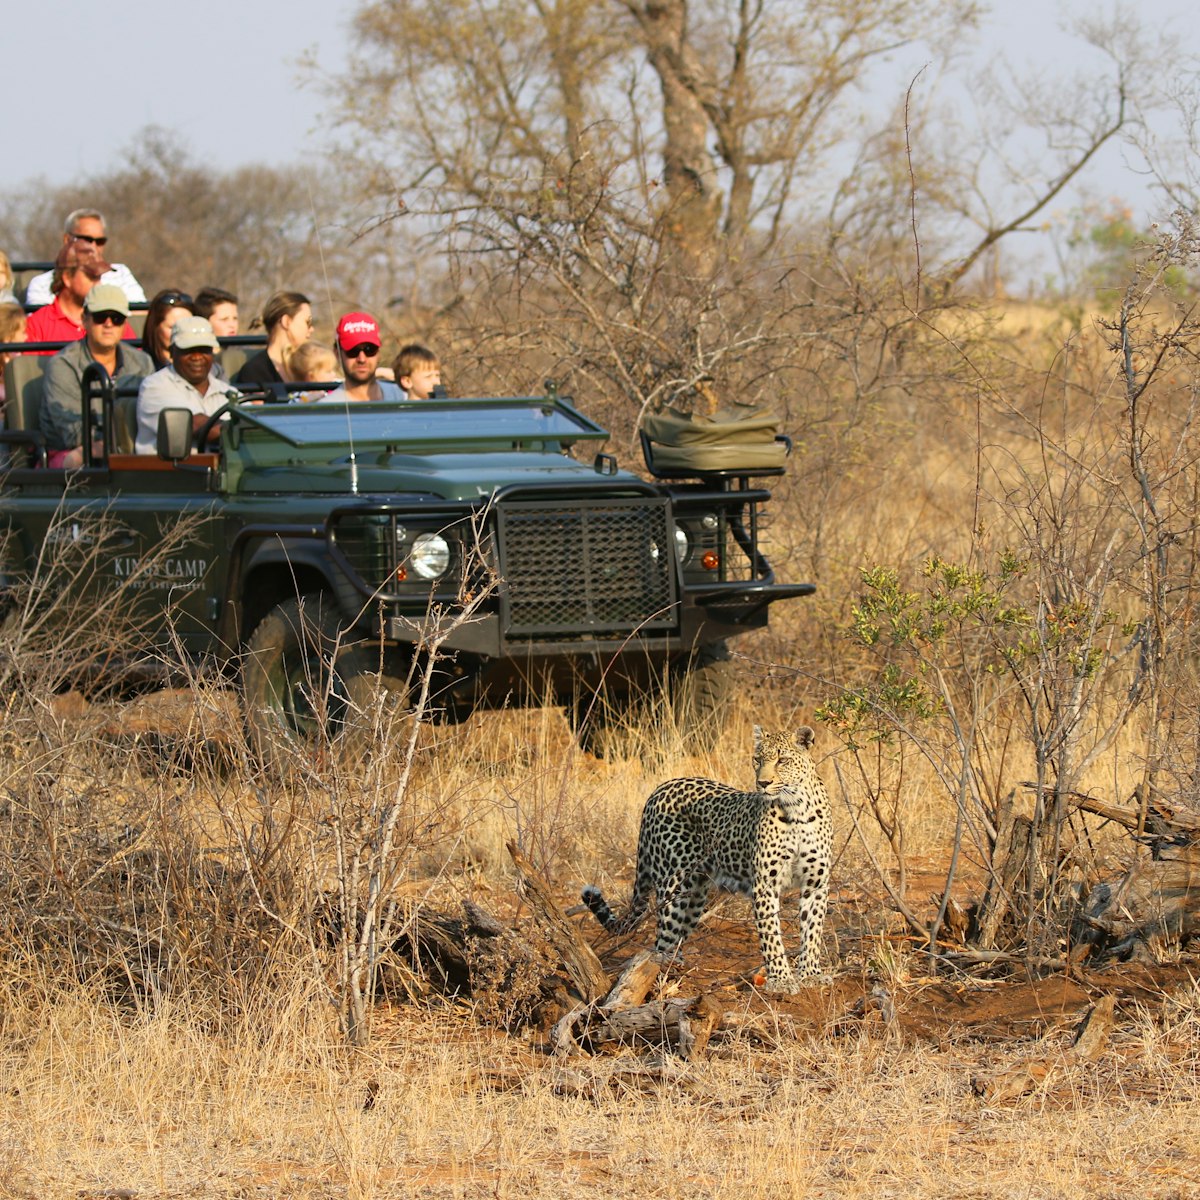 Tourists in a safari vehicle observing an African leopard in Timbavati Private Nature Reserve, South Africa.